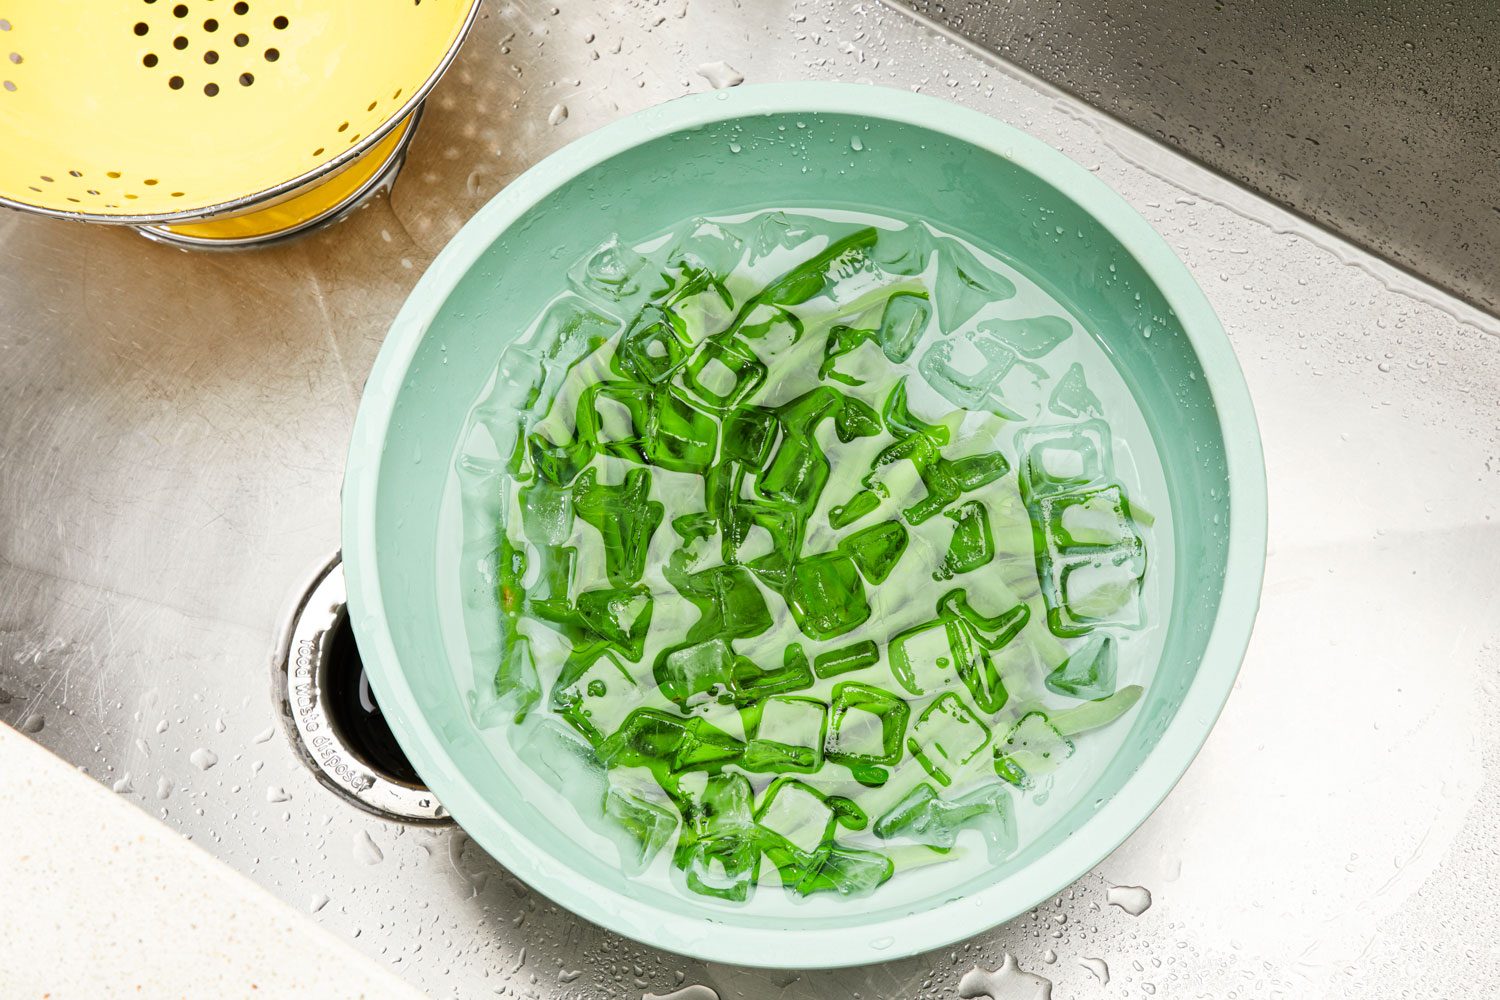 Green beans in an ice bath after boiling.